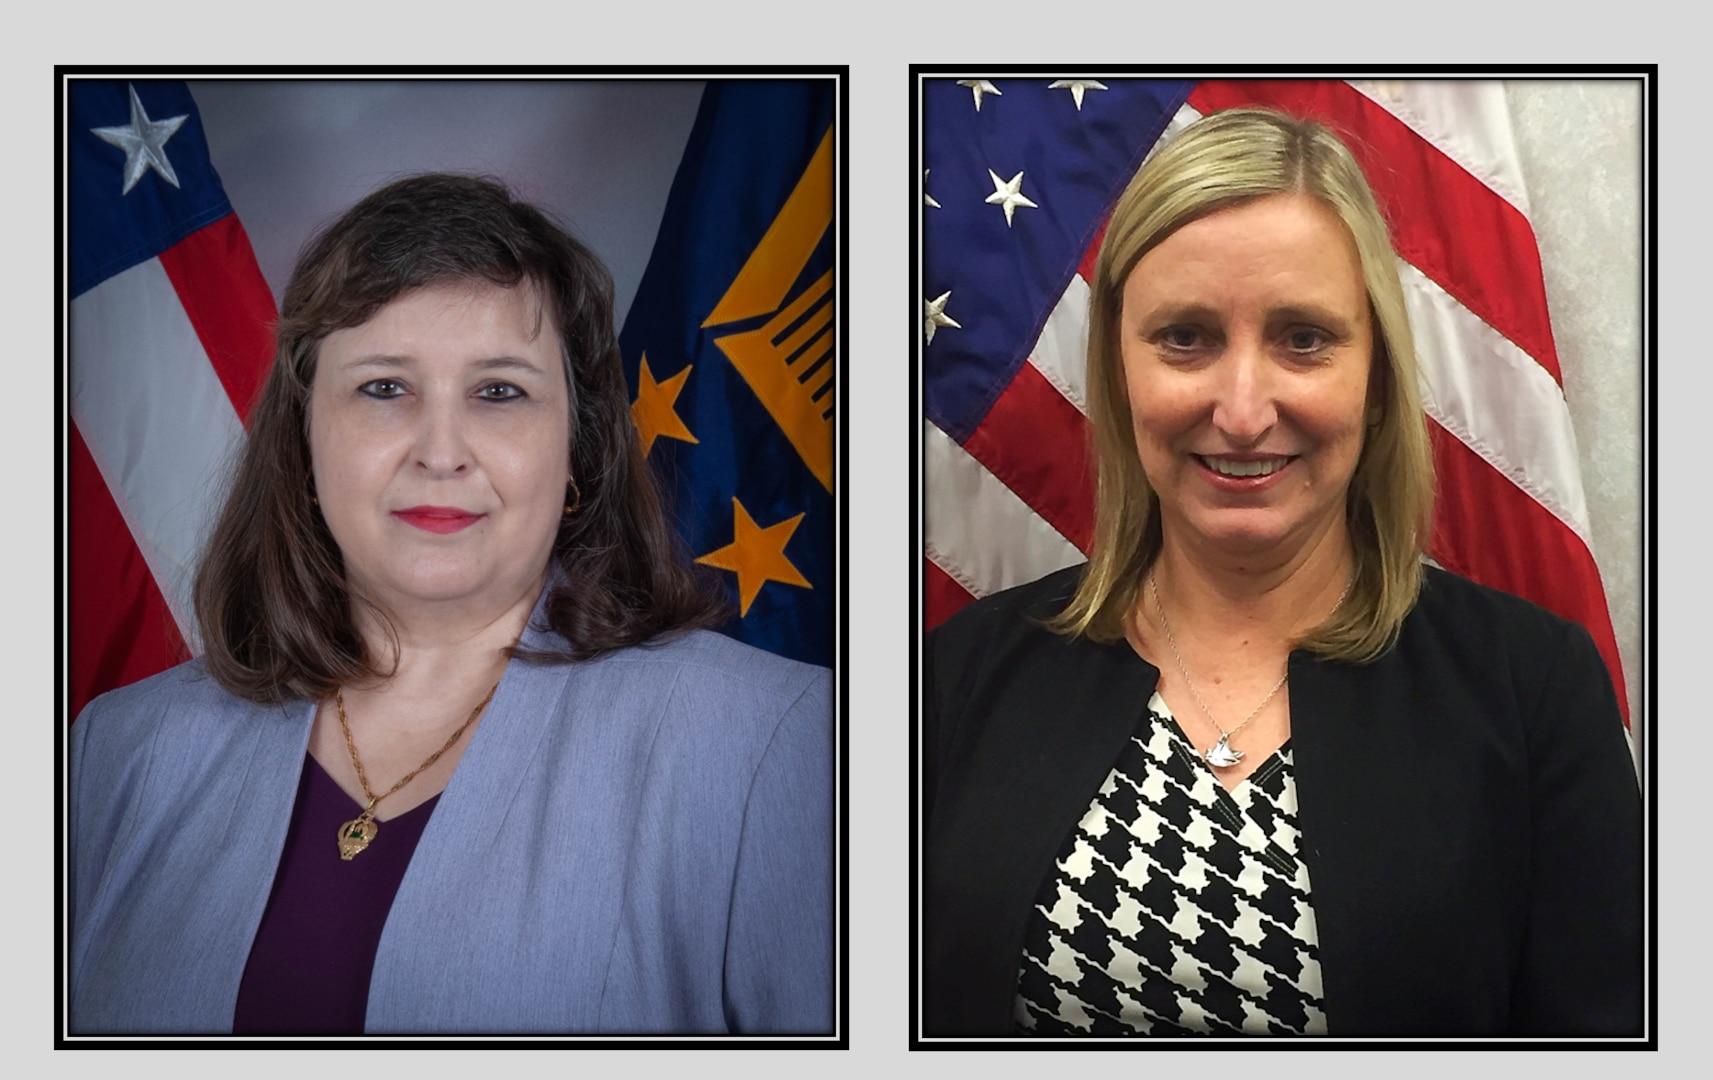 Ms. Angela Moomand, Corporate Audit Director for the Lockheed Martin - BAE Corporate Audit Directorate (left) and Ms. Laura Michaels, Corporate Audit Manager in the General Dynamics-Raytheon Technologies Corporate Audit Directorate (right)